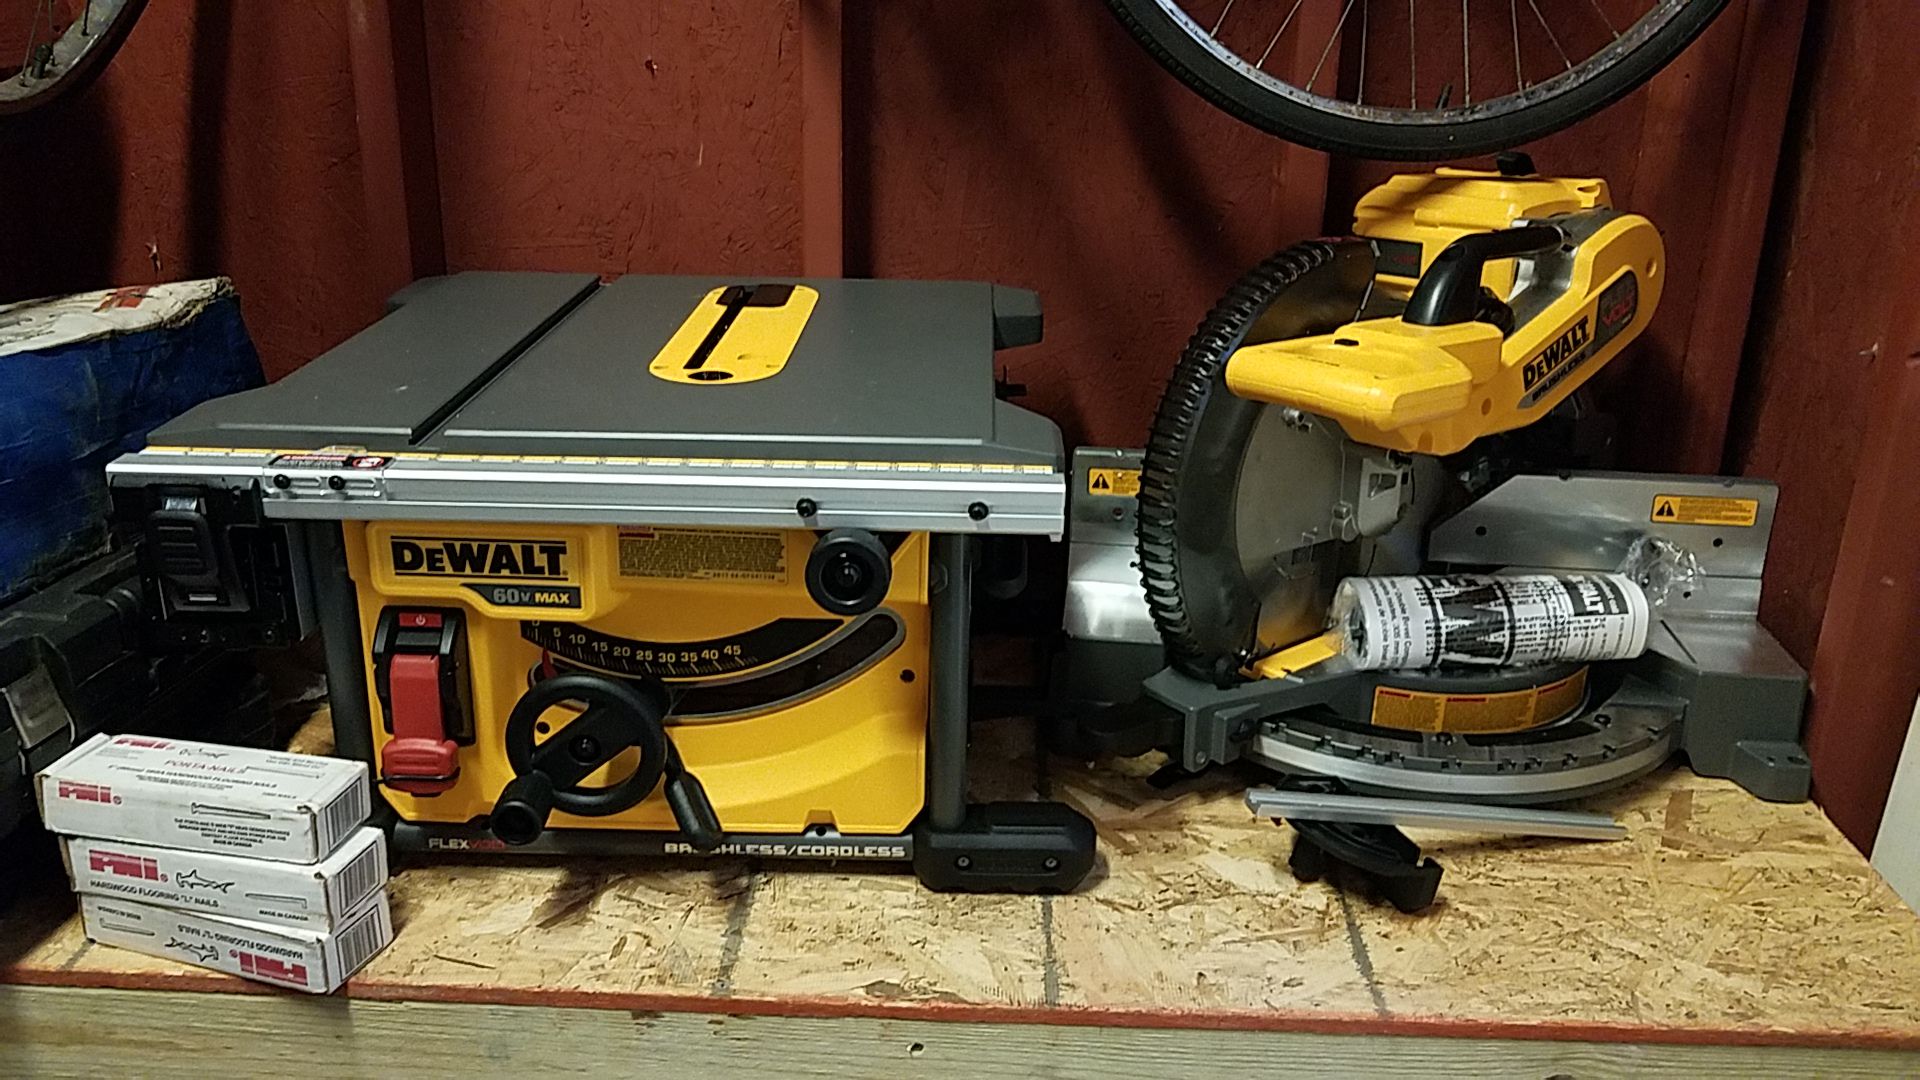 Table saw miter saw brand new